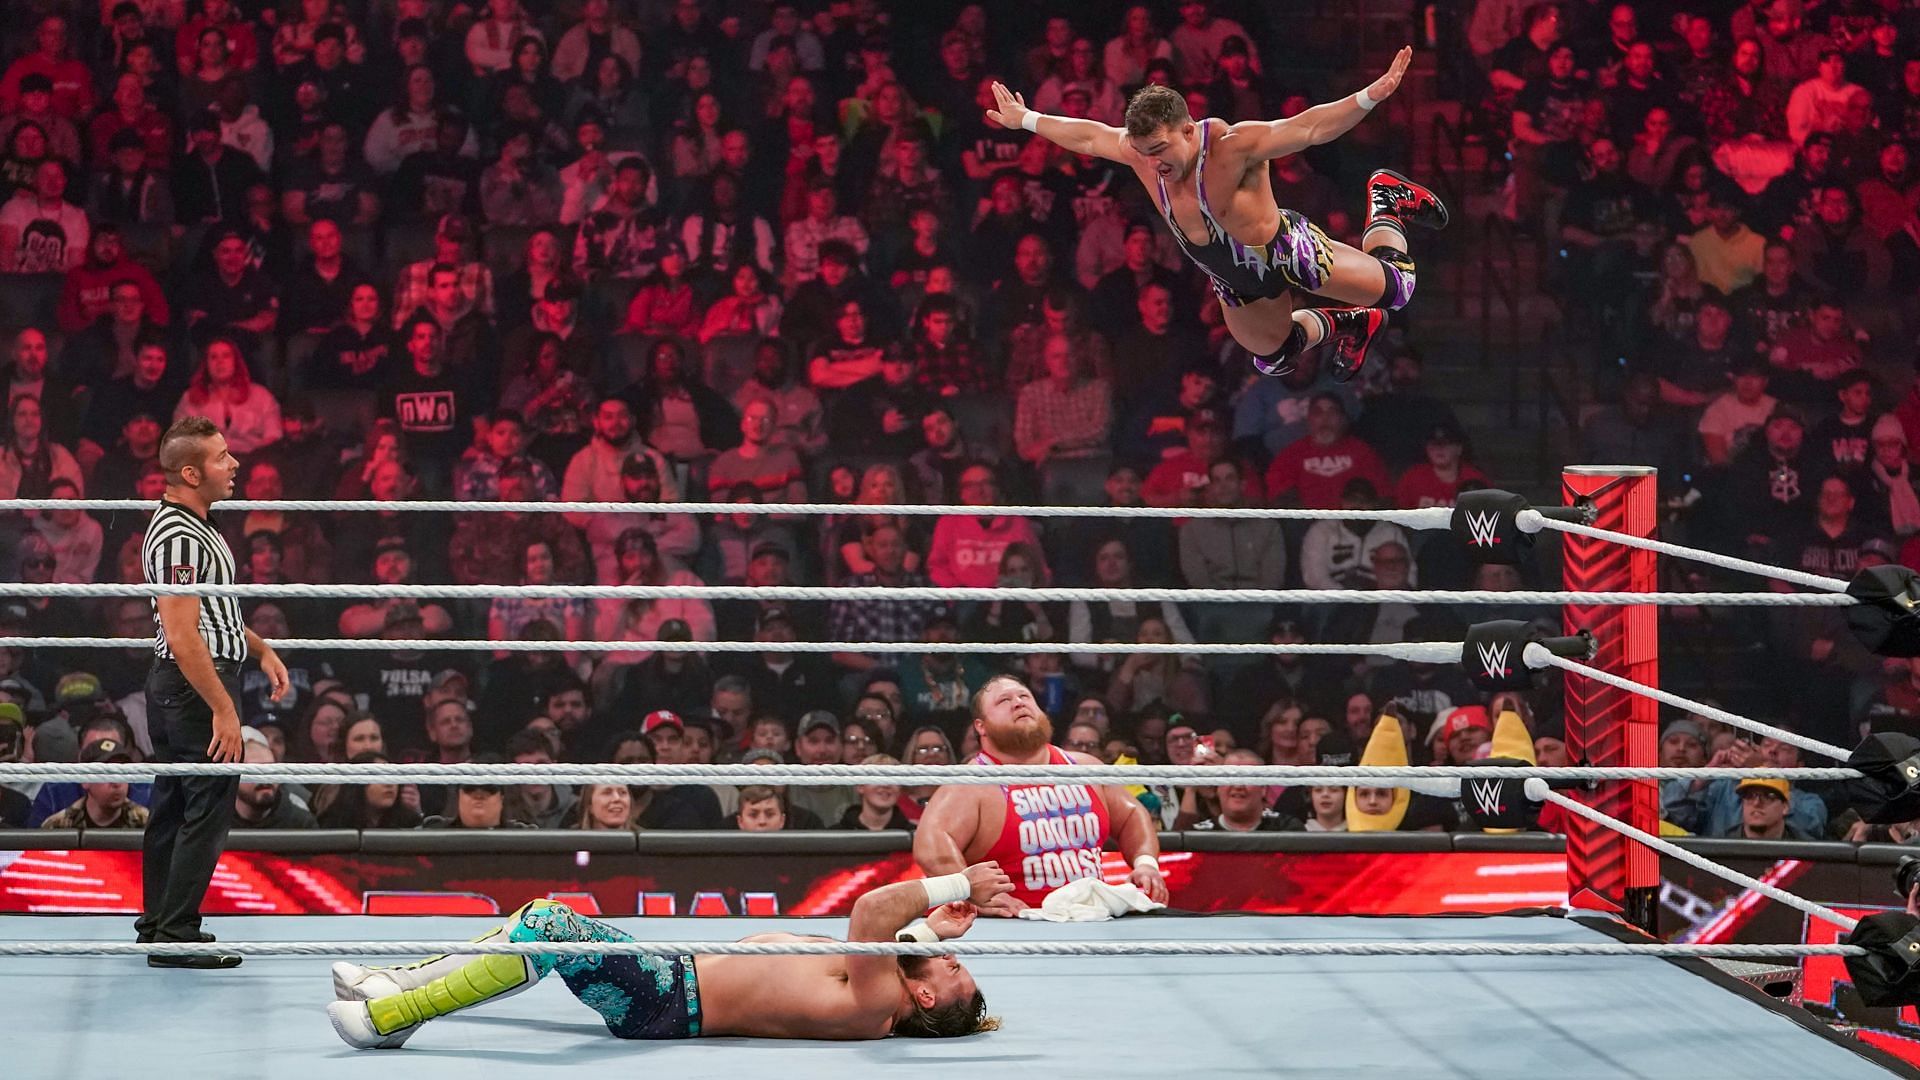 Chad Gable has helped bring back the Diving Headbutt